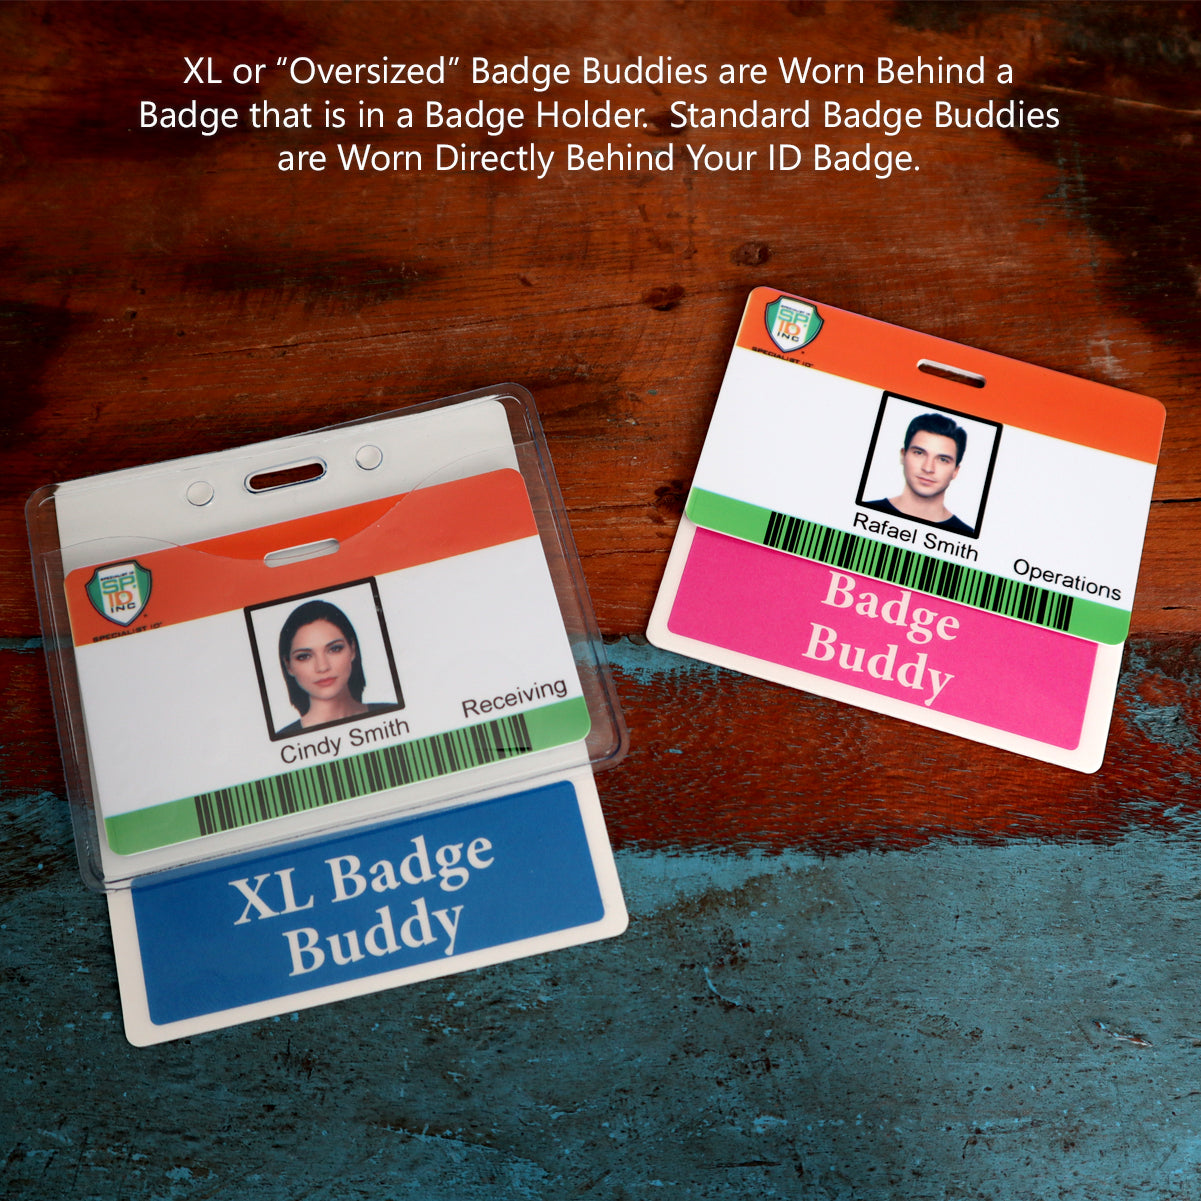 An image showing two ID badges. One is labeled "Cindy Smith" and "Receiving," and the other is labeled "Rafael Smith" and "Operations." A blue Oversized Custom Printed Horizontal XL Badge Buddy (Extra Large Size) card for easy ID badge recognition is also shown.